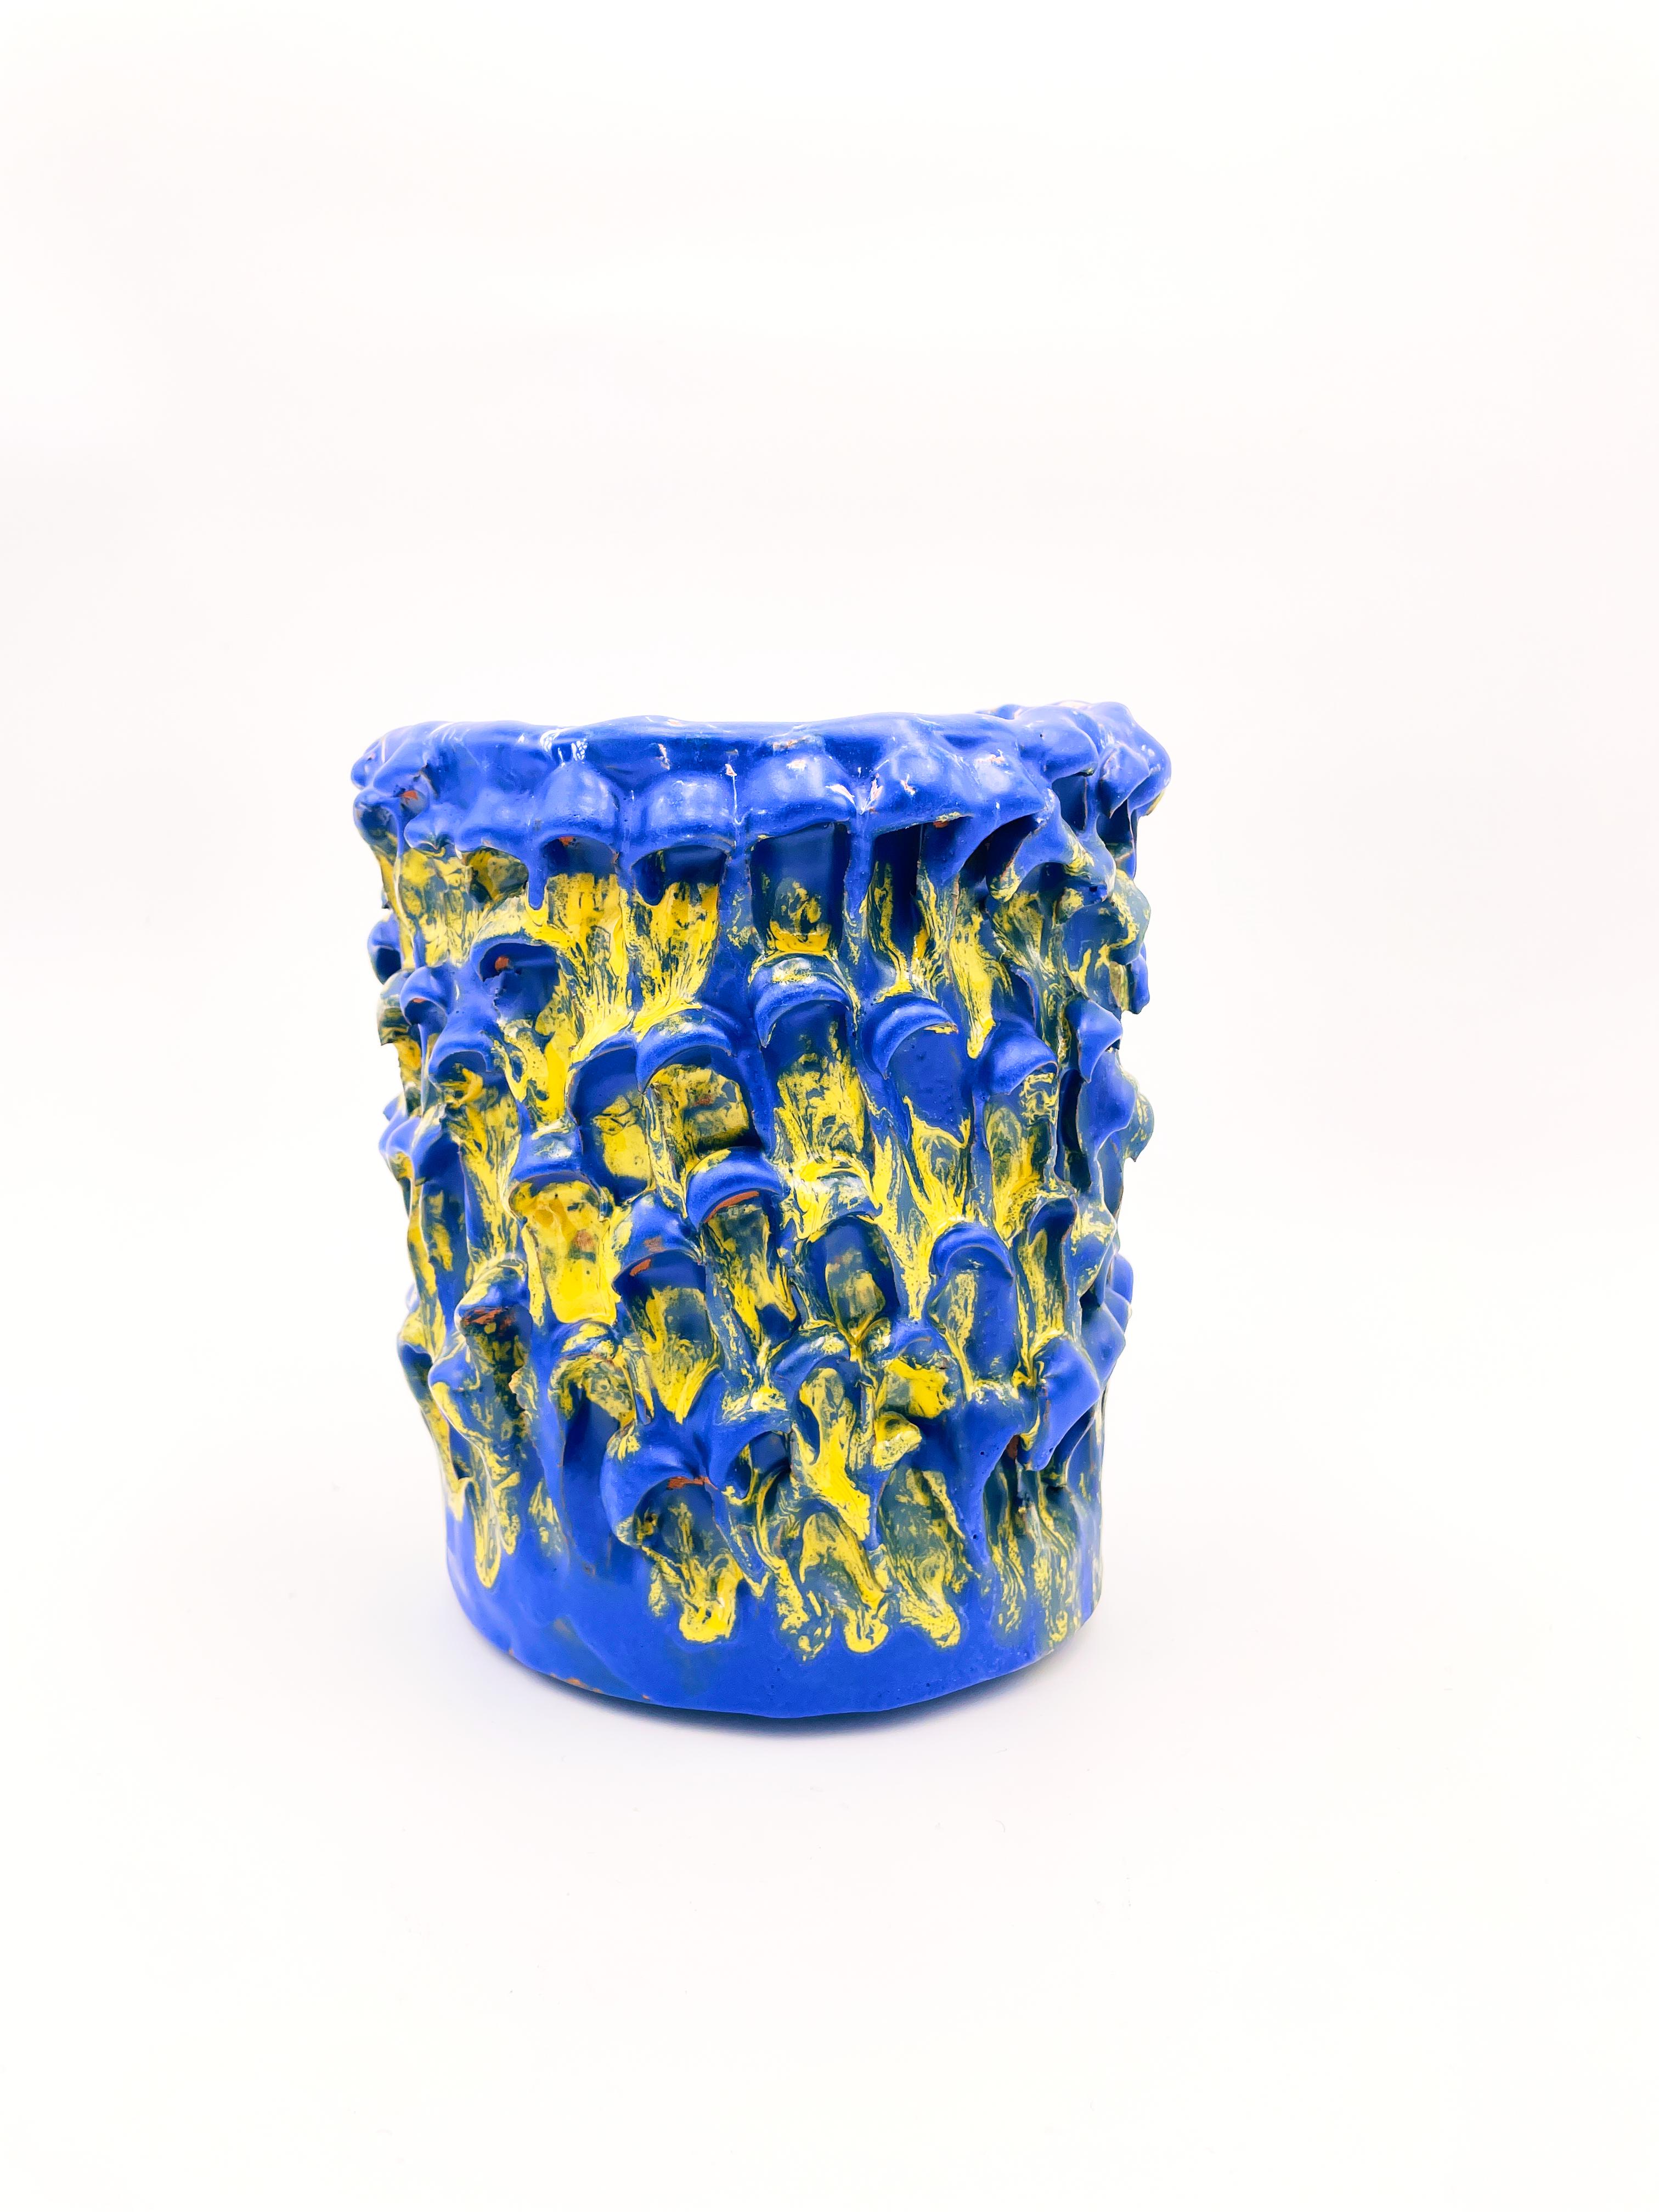 Onda Vase in Egyptian Blue and Sunflower Yellow 01 /20 numbered serie
Unique Handmade Piece
Glazed earthenware by Daria Dazzan
Earthenware, glazes
18 X 20 cm ab.

Handmade earthenware vase by Daria Dazzan, unique piece, numbered.
Daria Dazzan